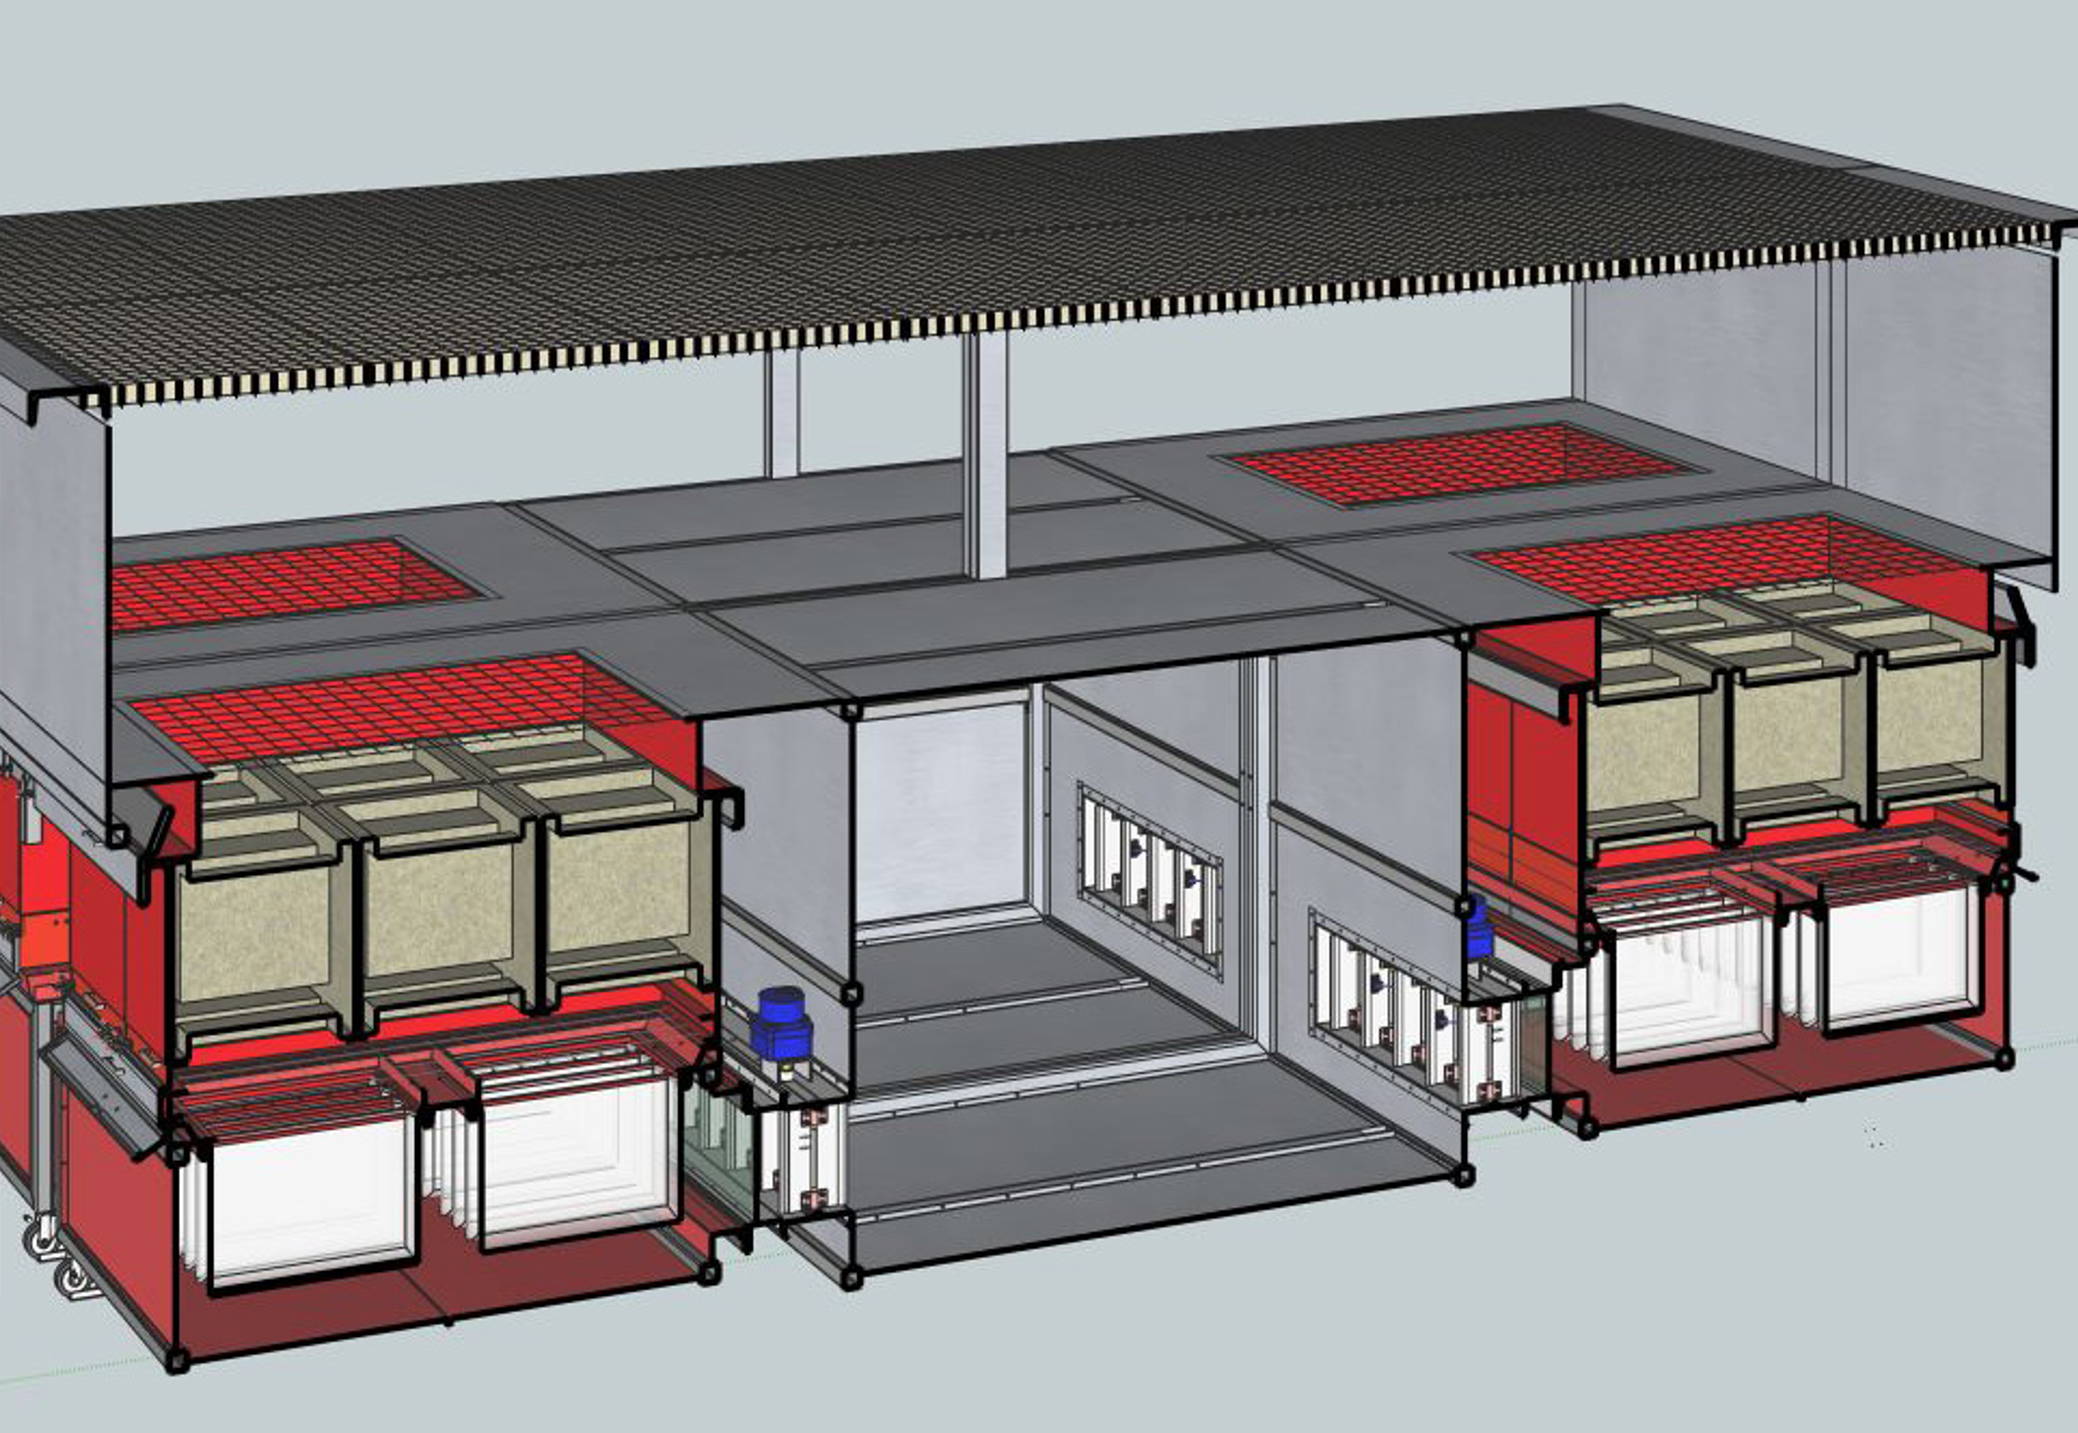 taikisha i-dry cardboard filter paint booth sketch